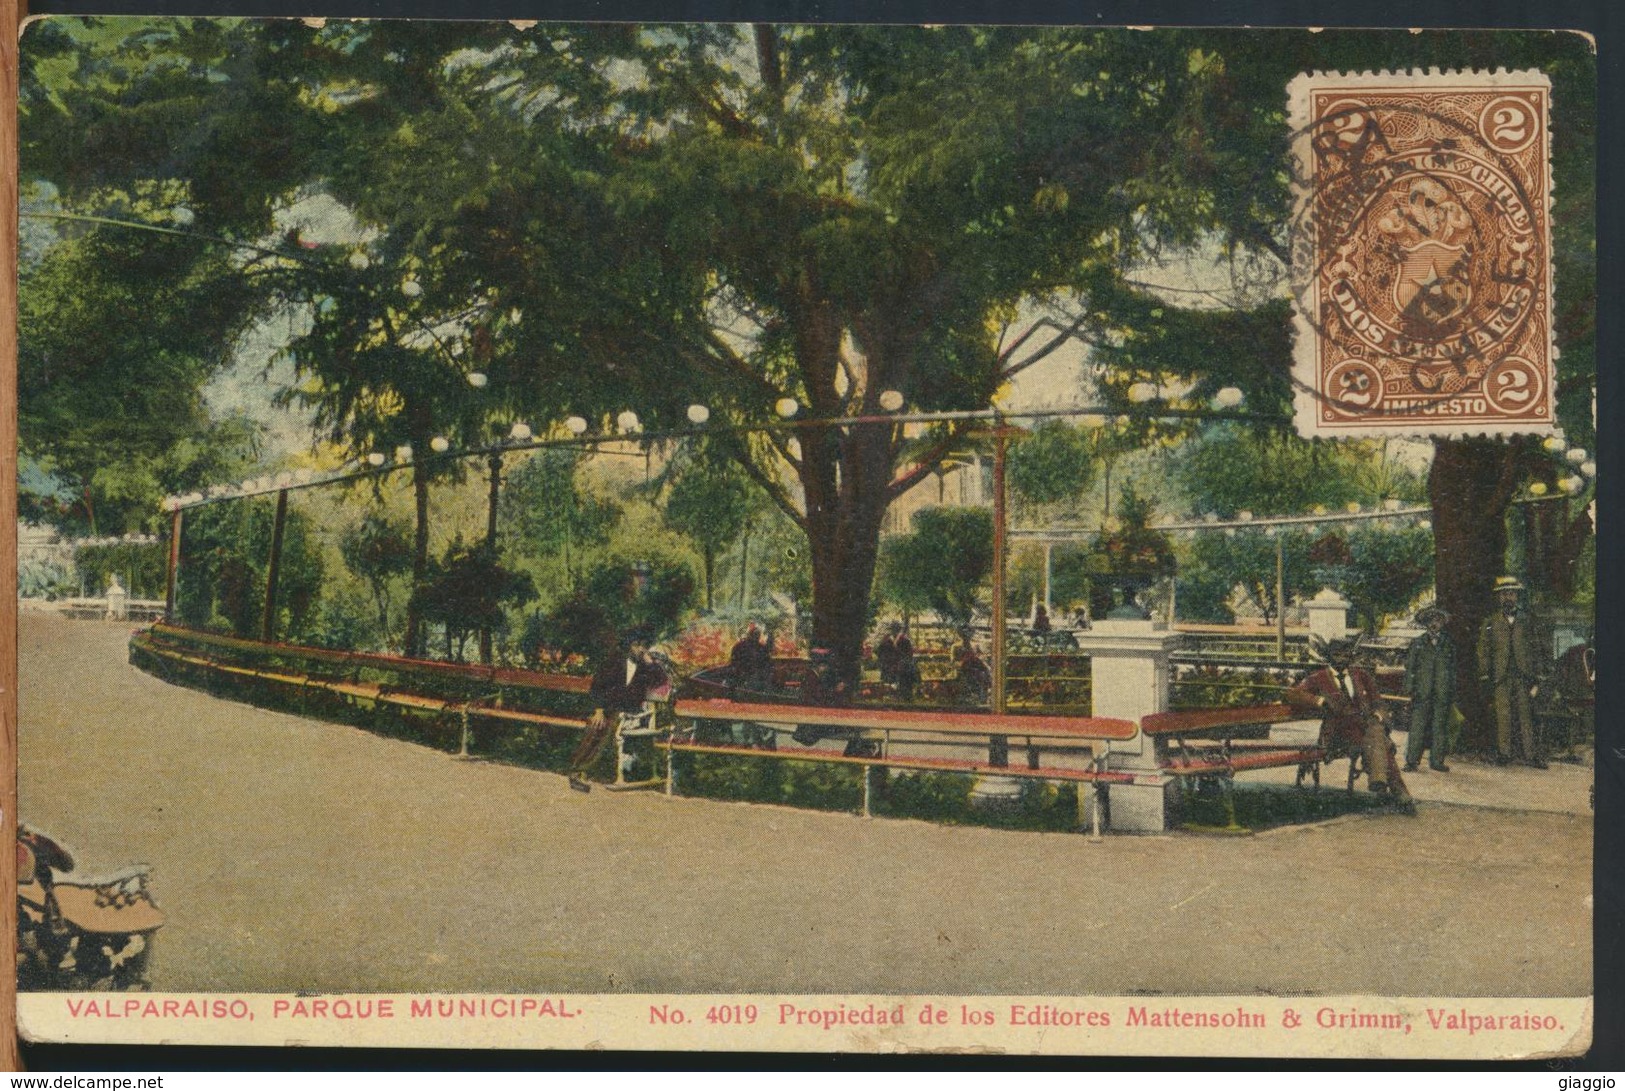 °°° 10993 - CILE CHILE - VALPARAISO PARQUE MUNICIPAL - 1913 With Stamps °°° - Cile